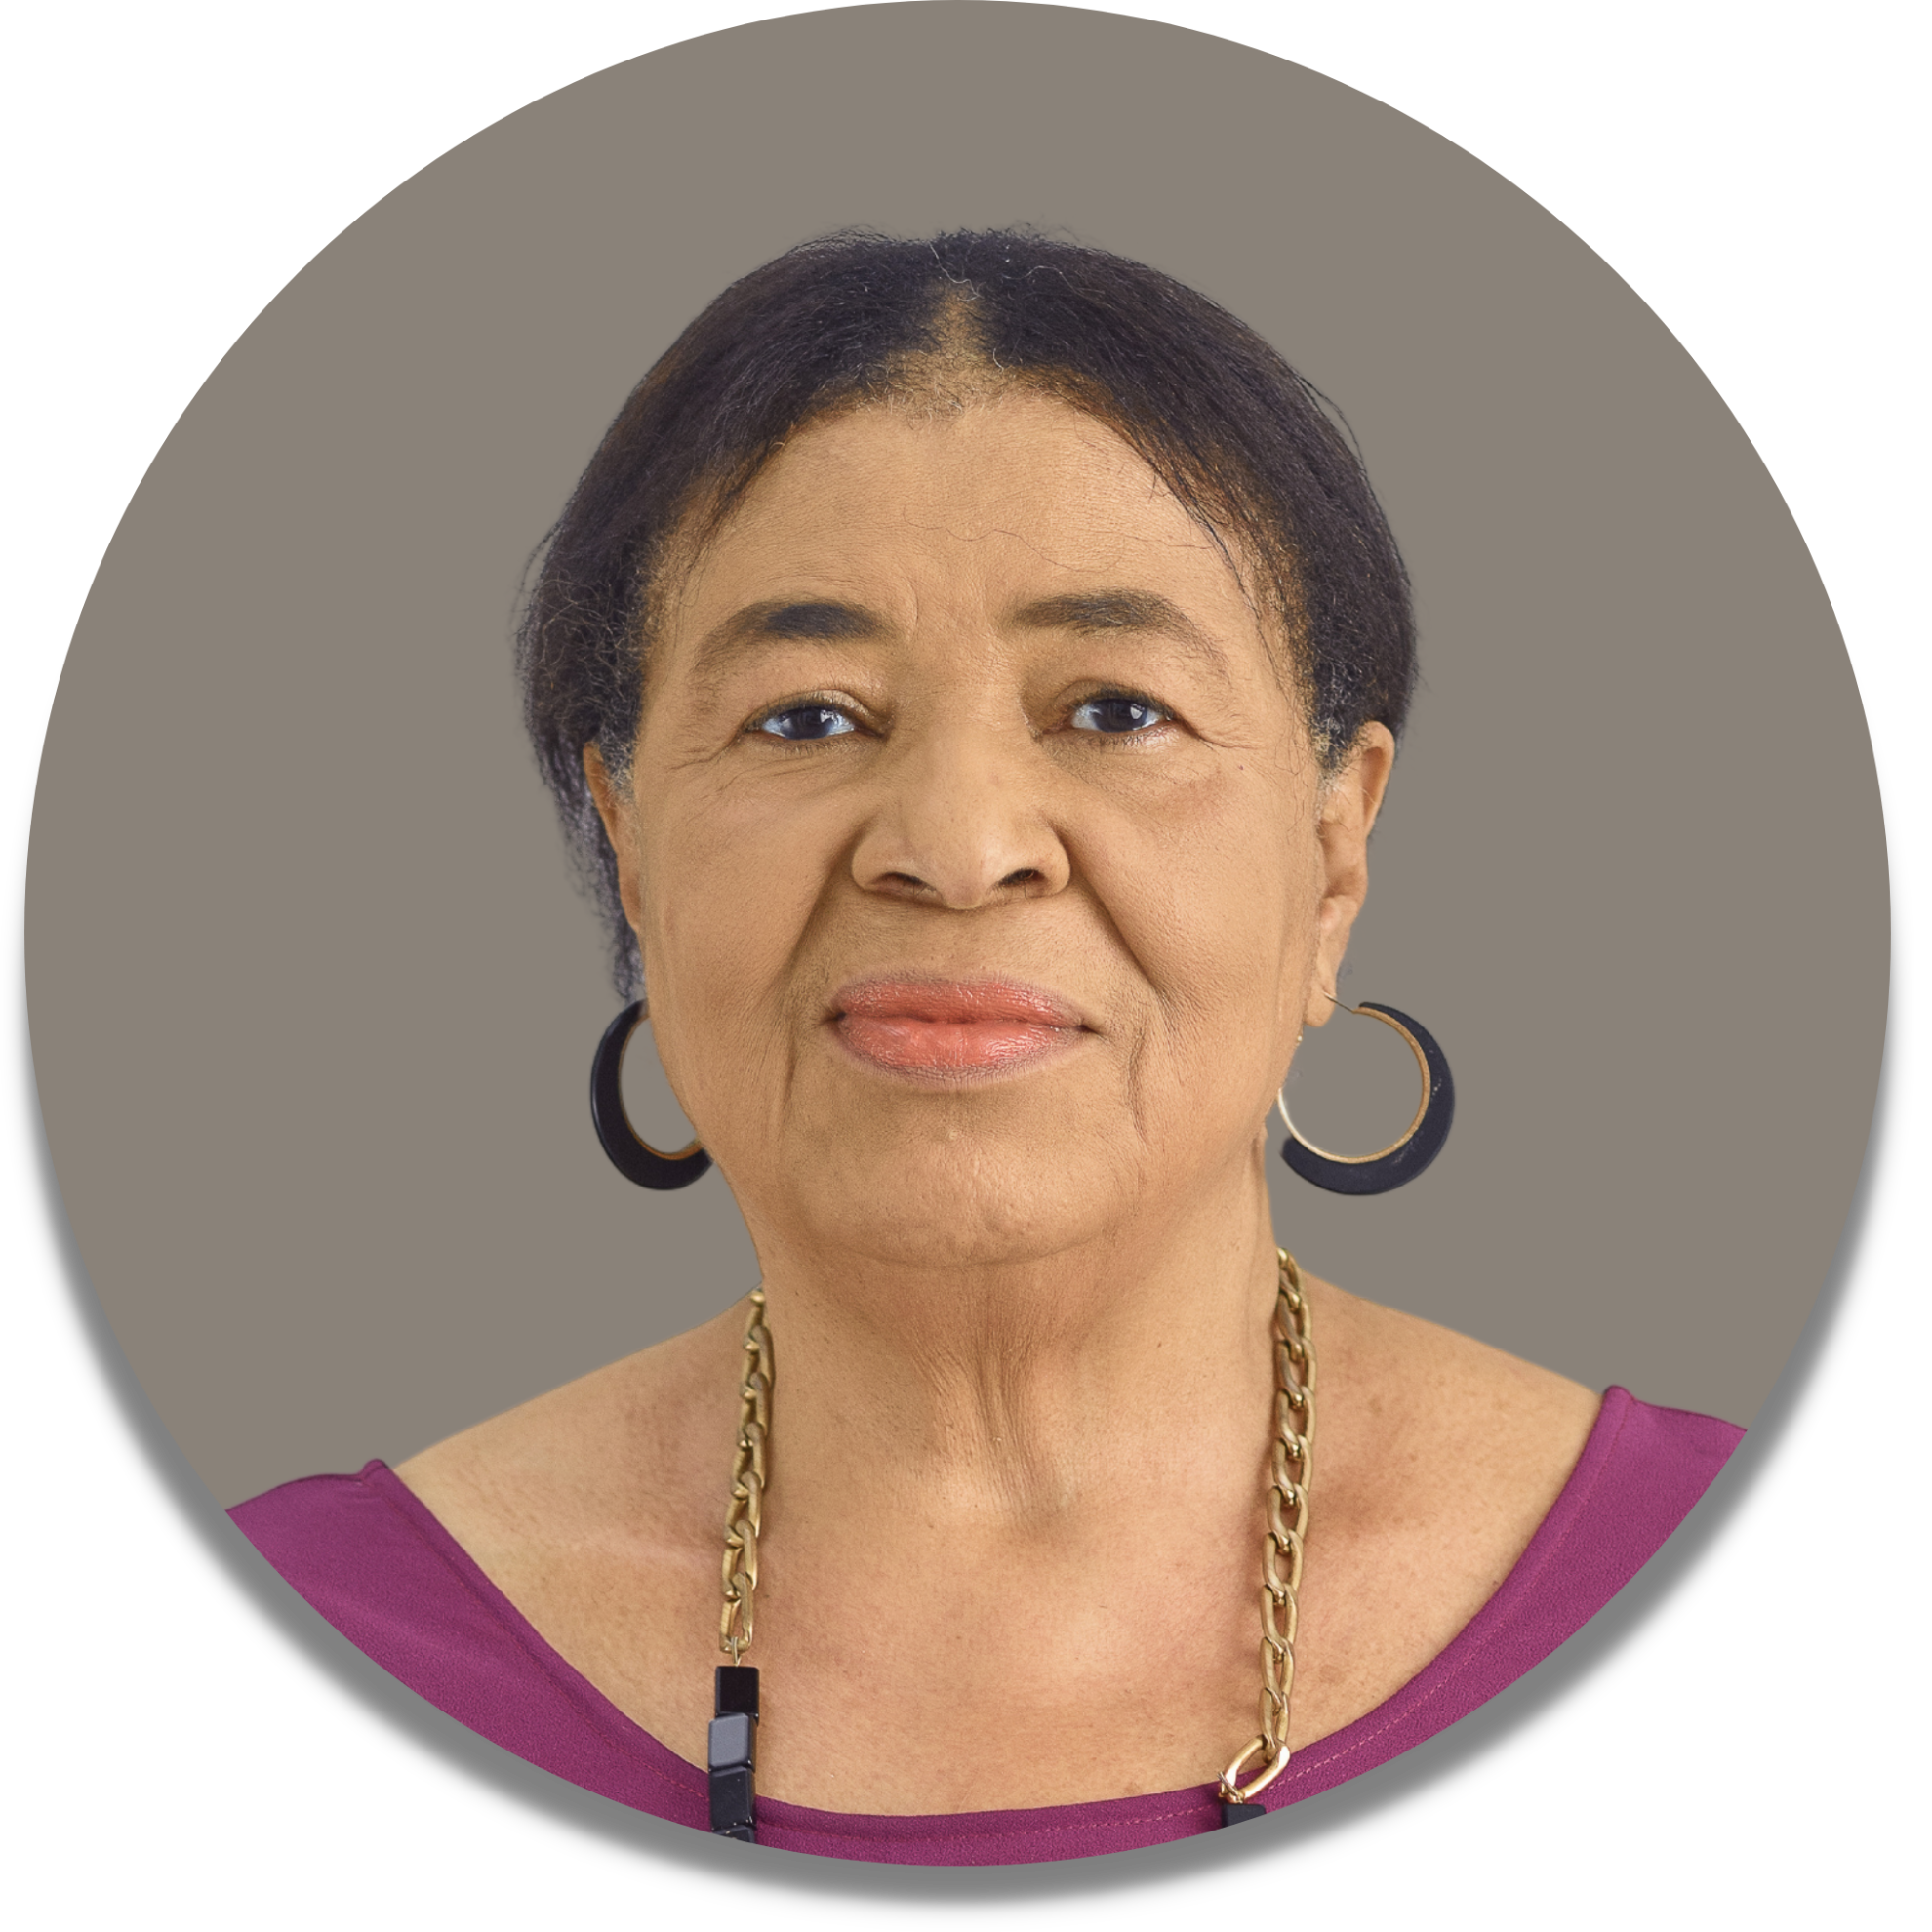 Dr. Dere Awosika